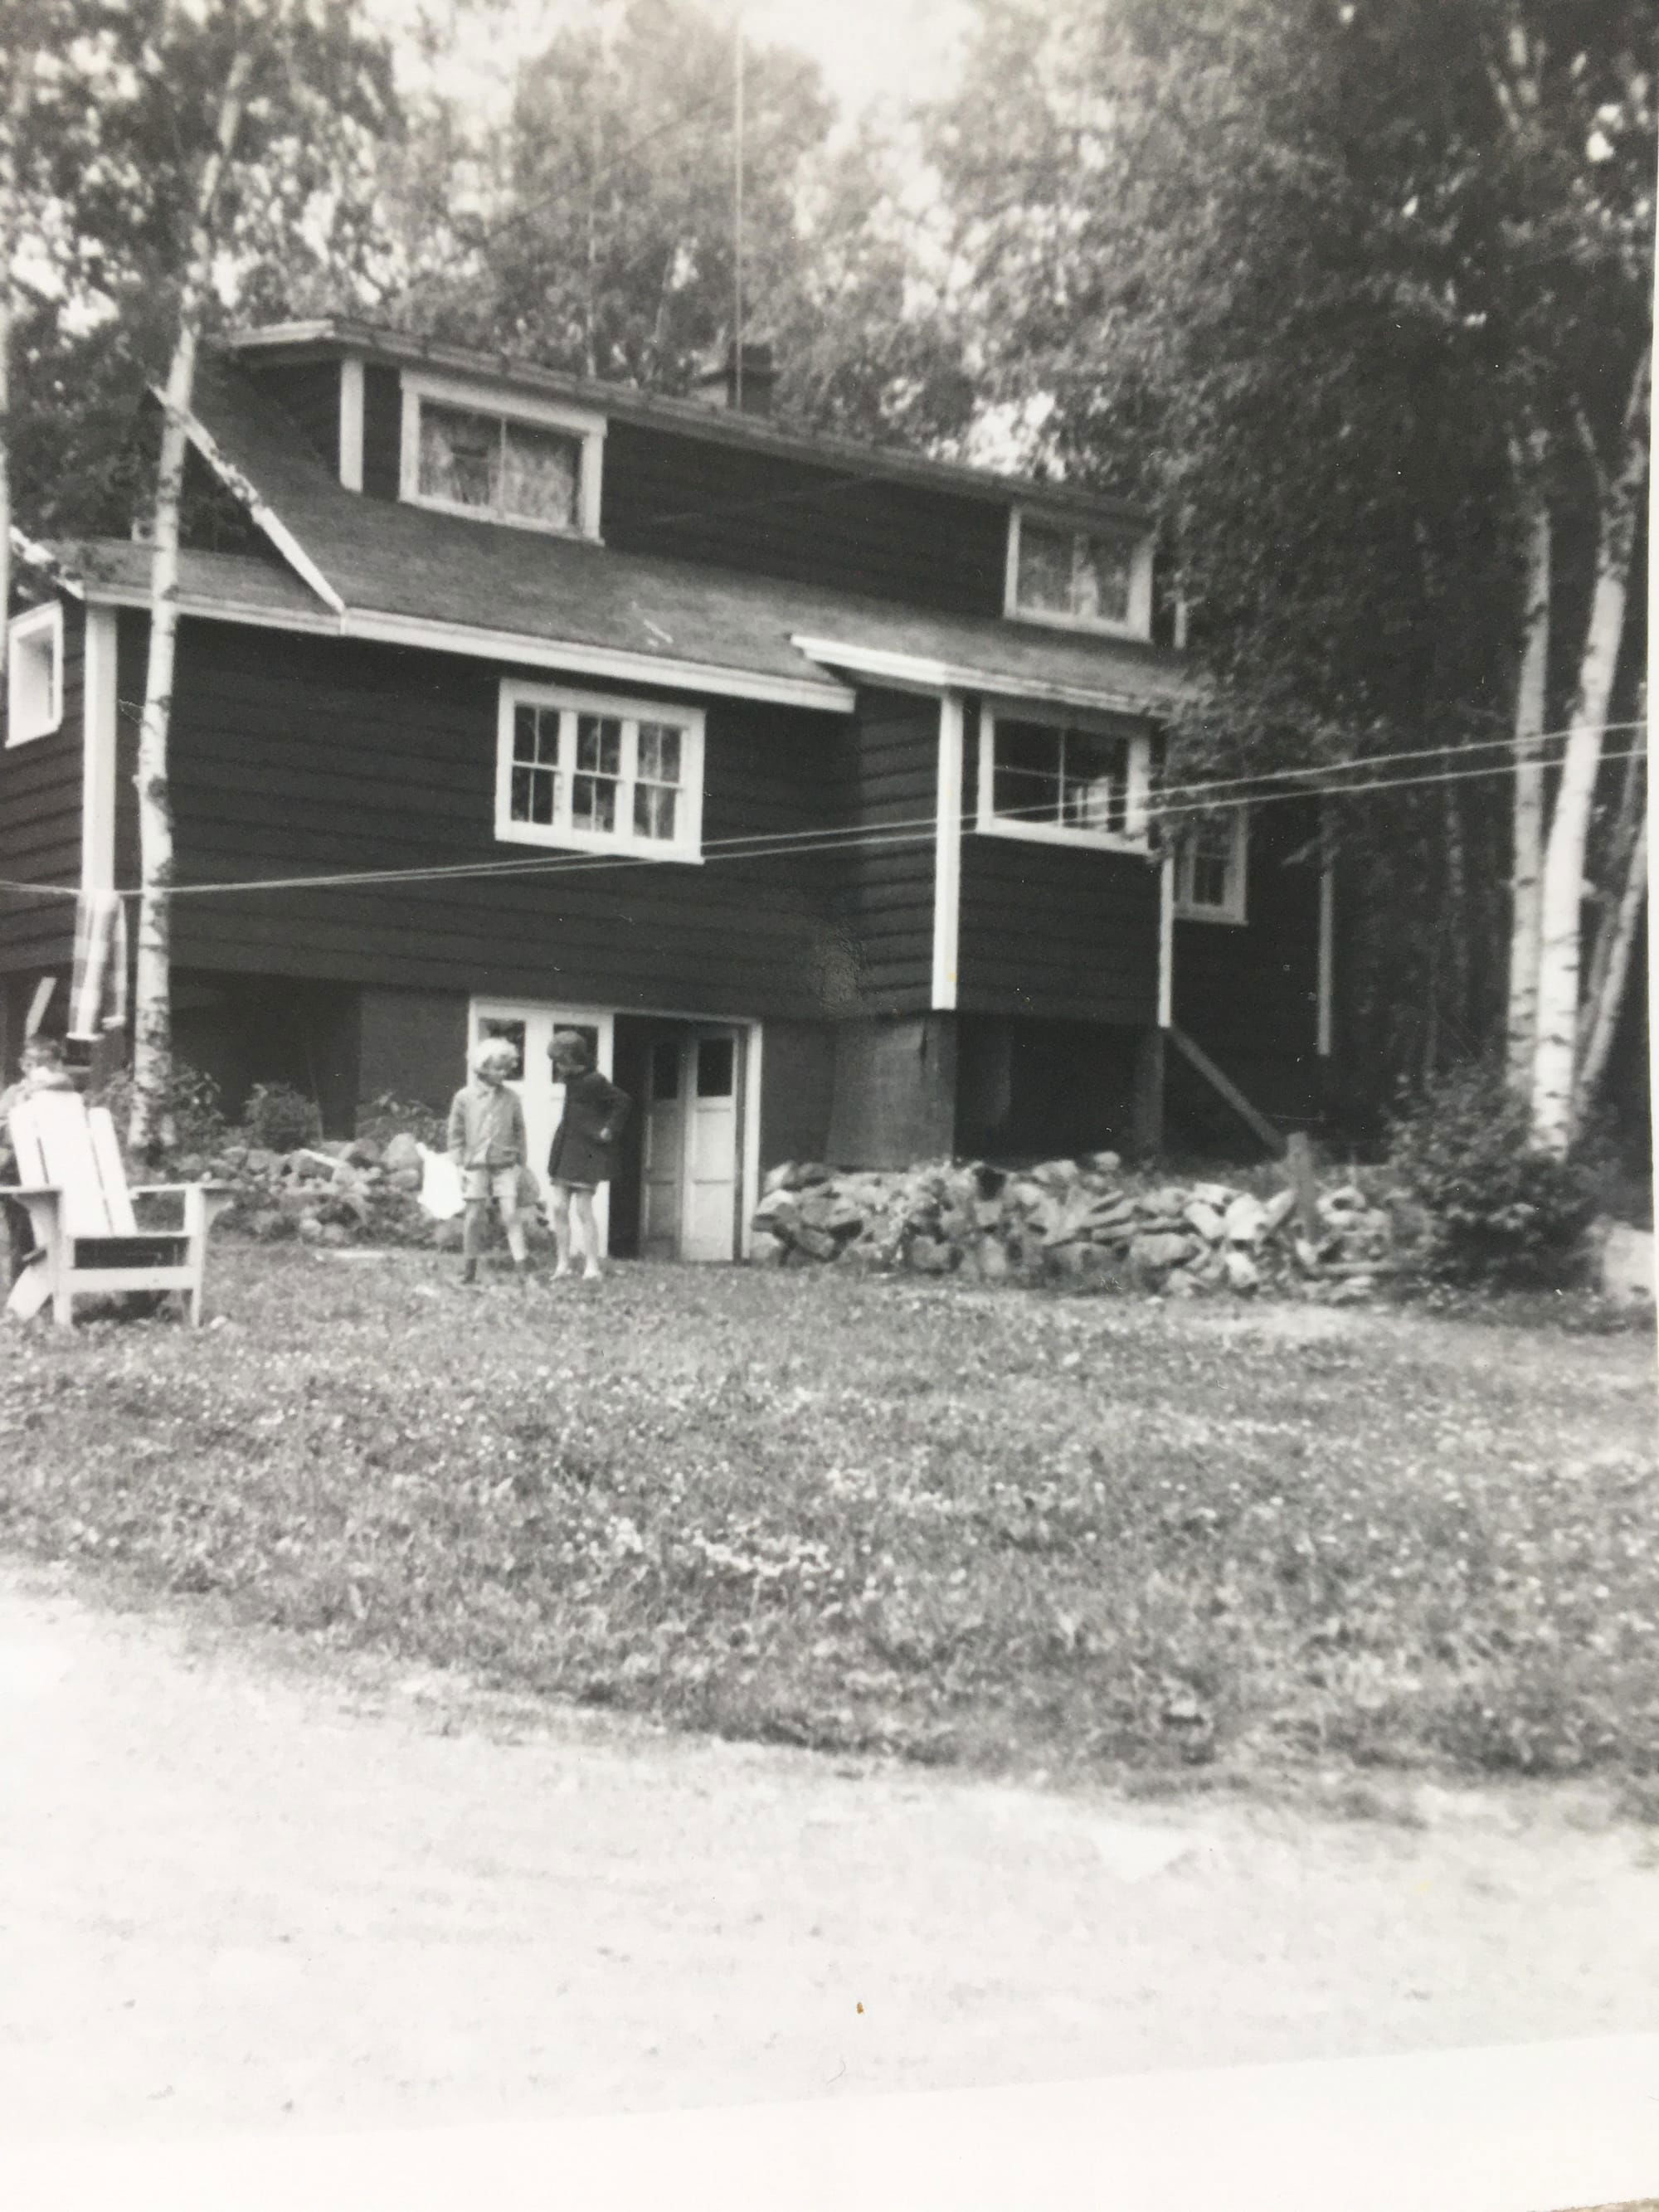 Zoë's house on the bluff, 1957